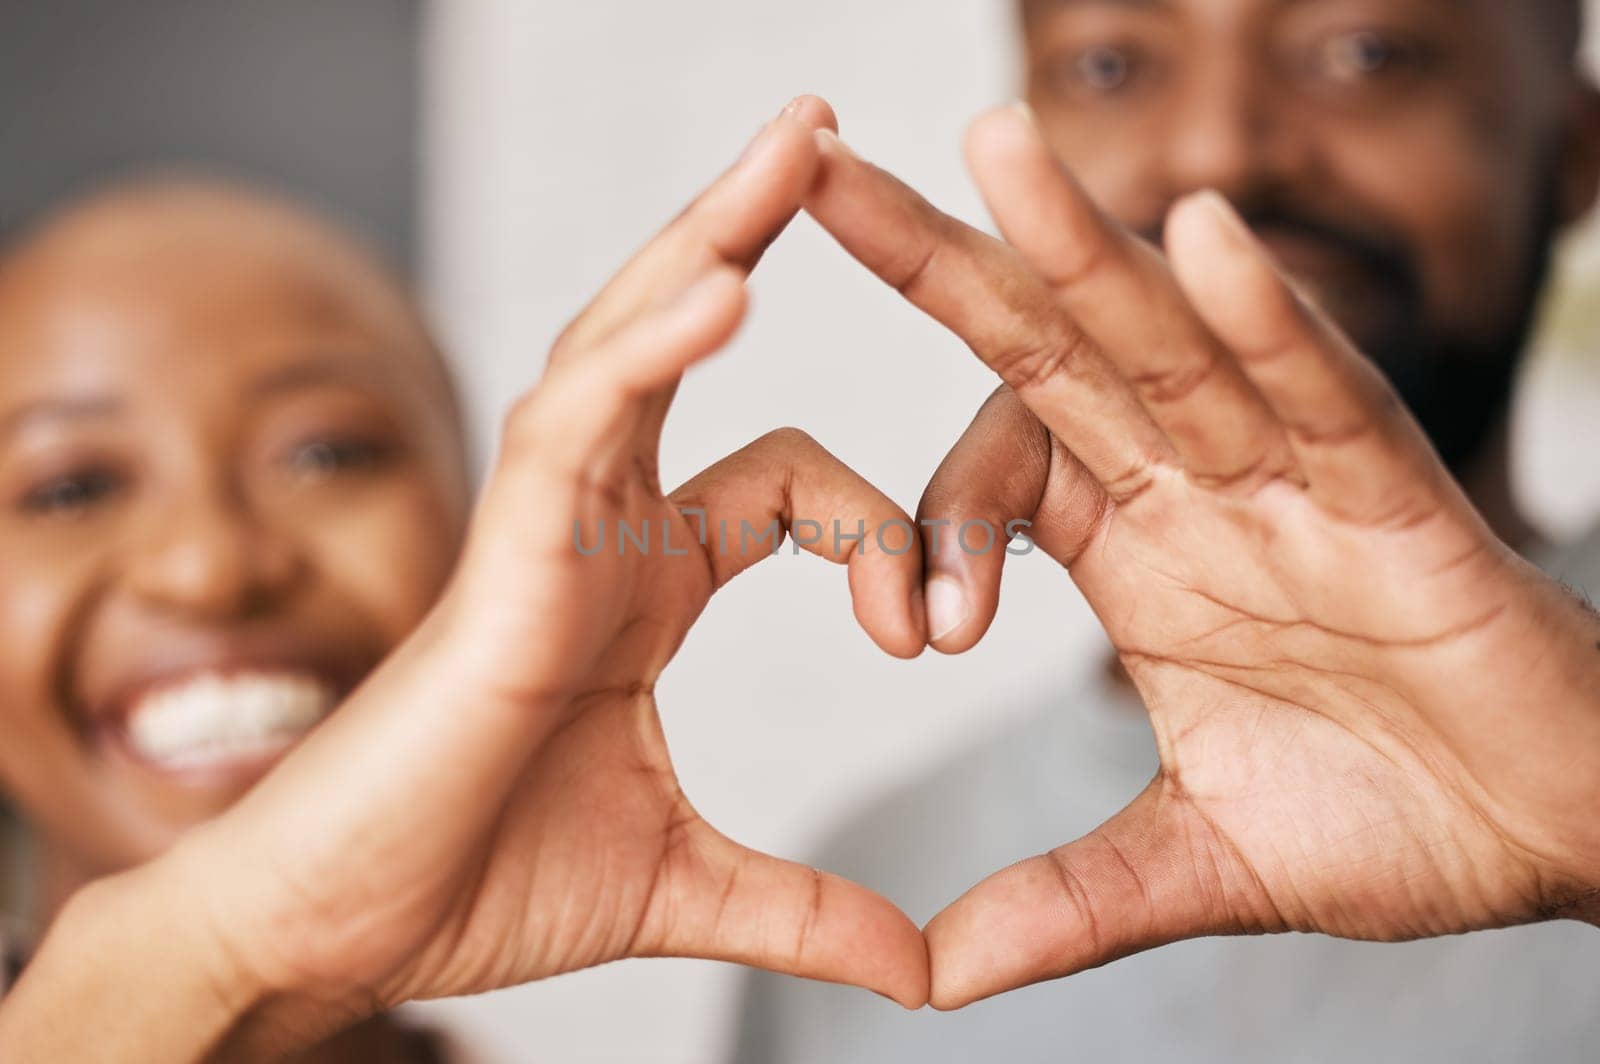 Happy, hands in heart and black couple with smile for relationship, dating and commitment in home. Love, emoji sign and face of black woman and man with hand shape for bonding, romance and trust.